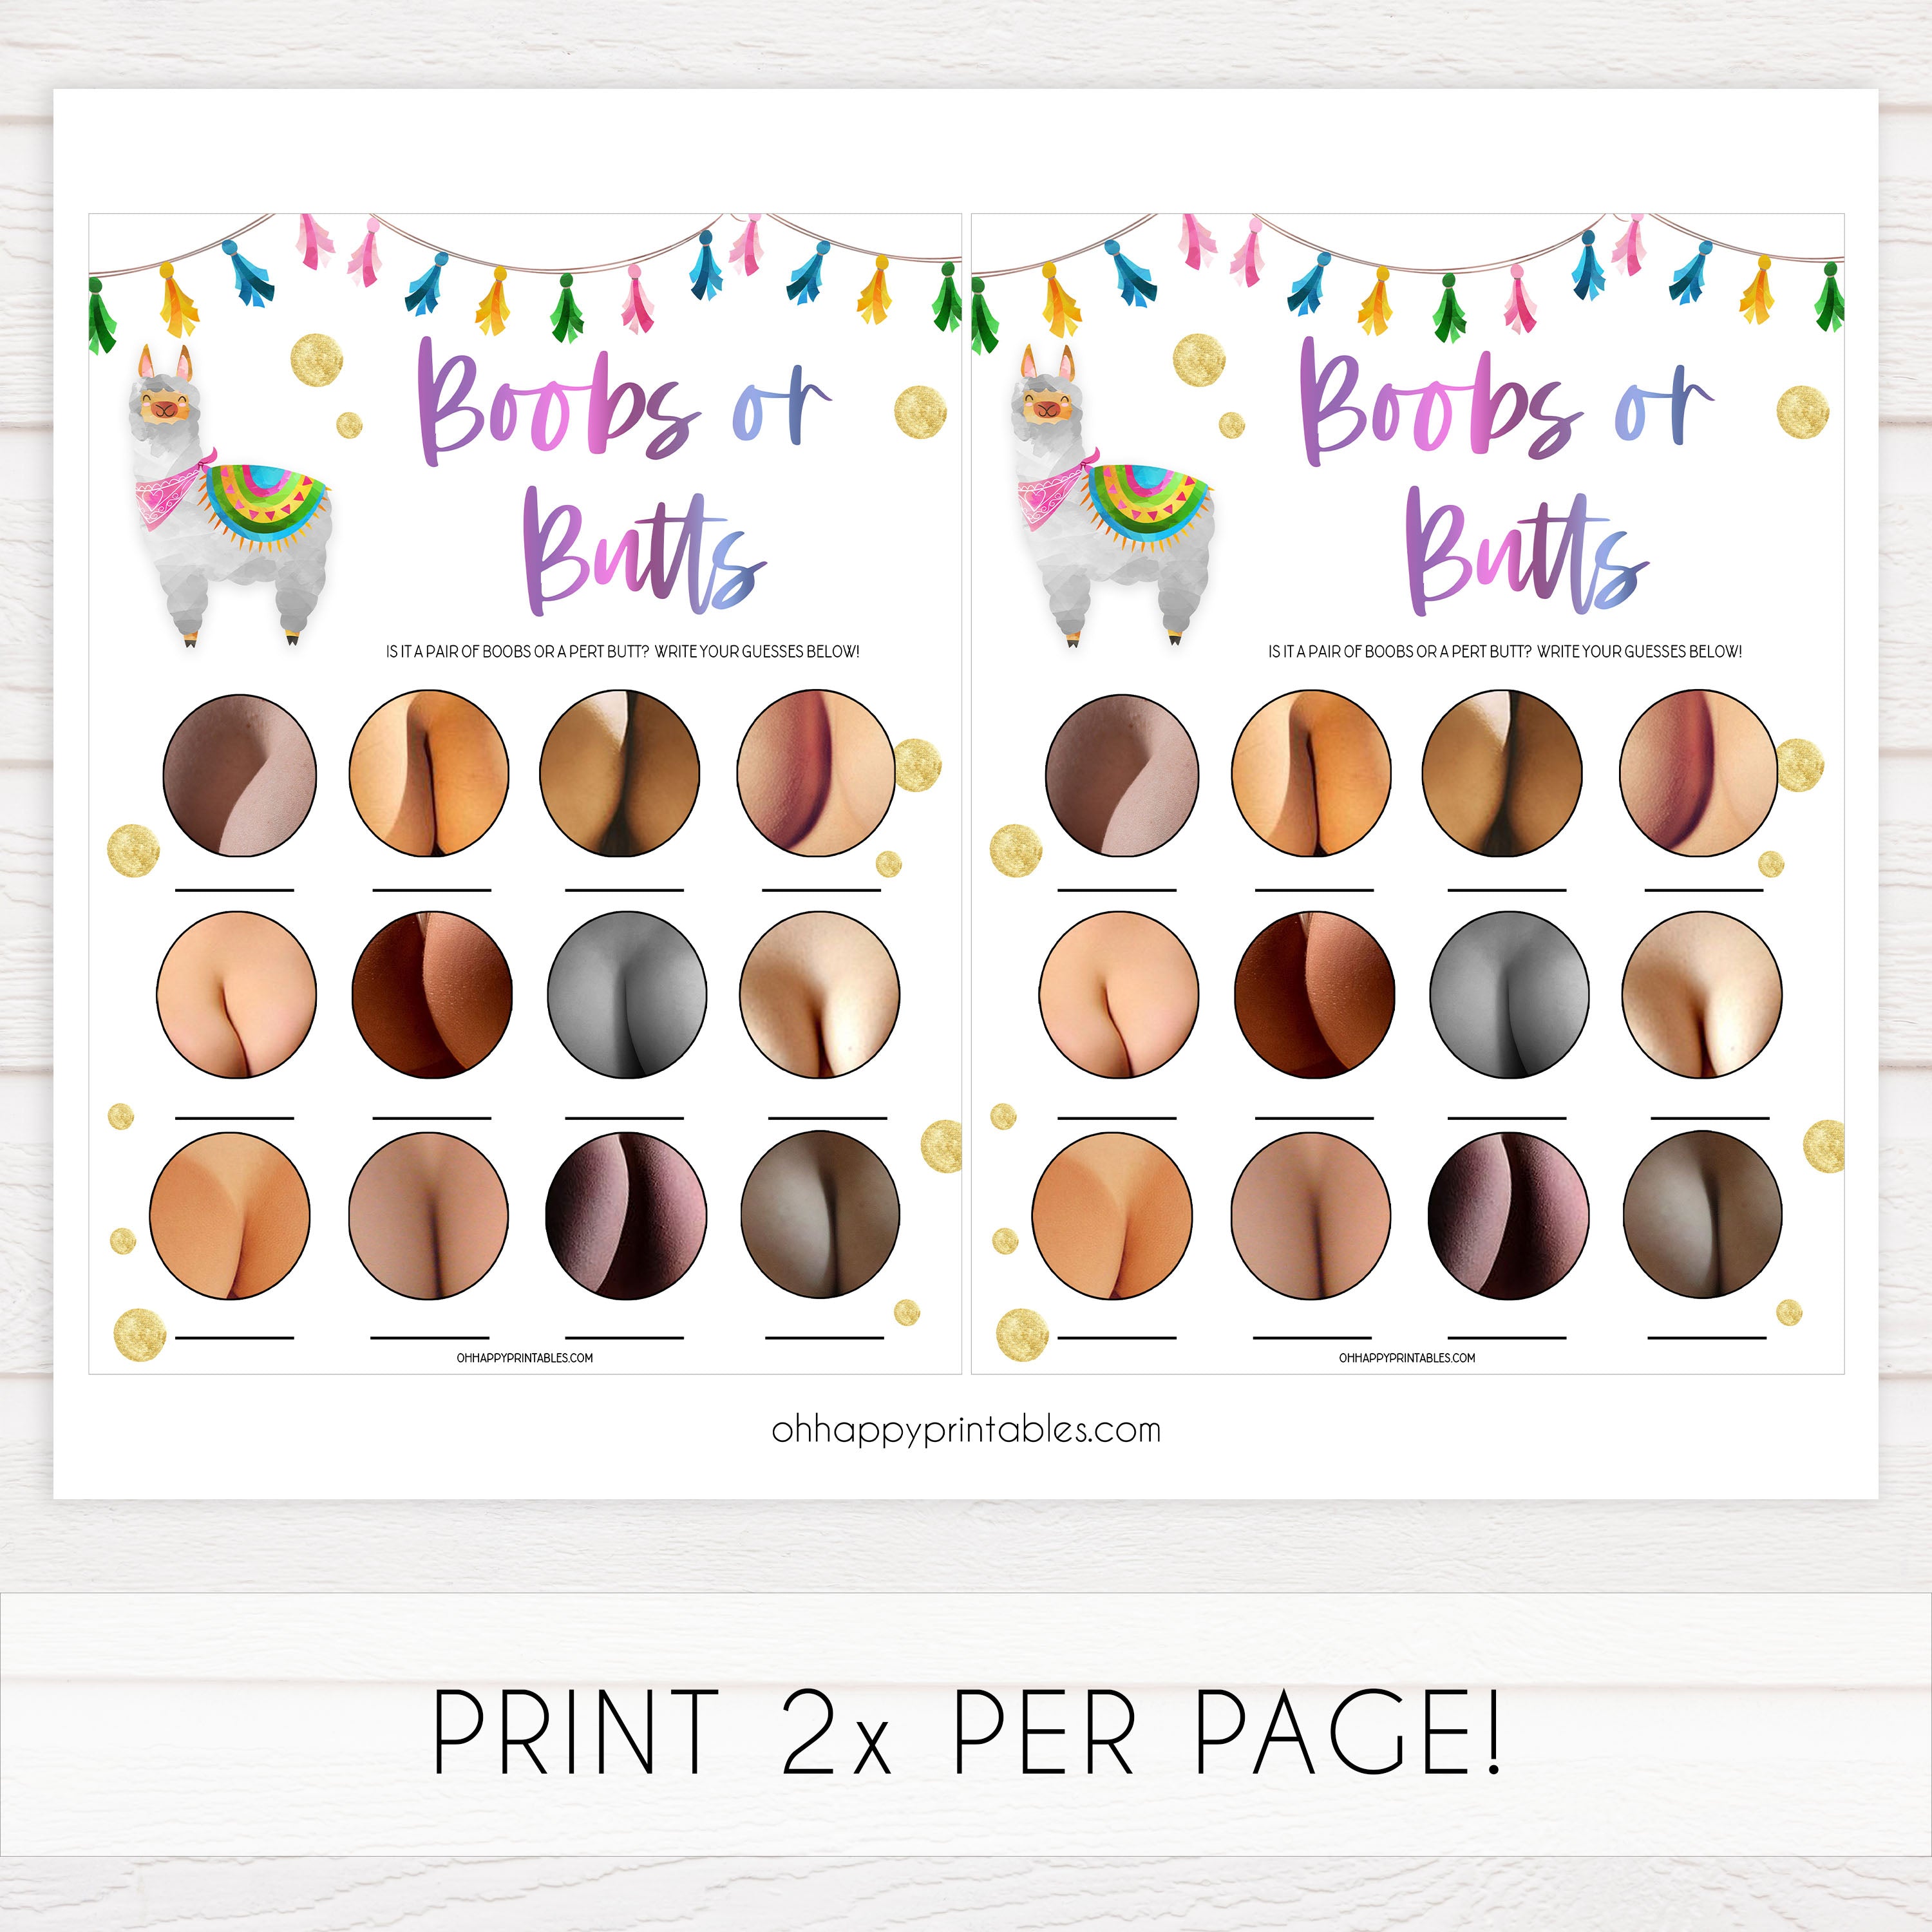 boobs or butts game, Printable baby shower games, llama fiesta fun baby games, baby shower games, fun baby shower ideas, top baby shower ideas, Llama fiesta shower baby shower, fiesta baby shower ideas